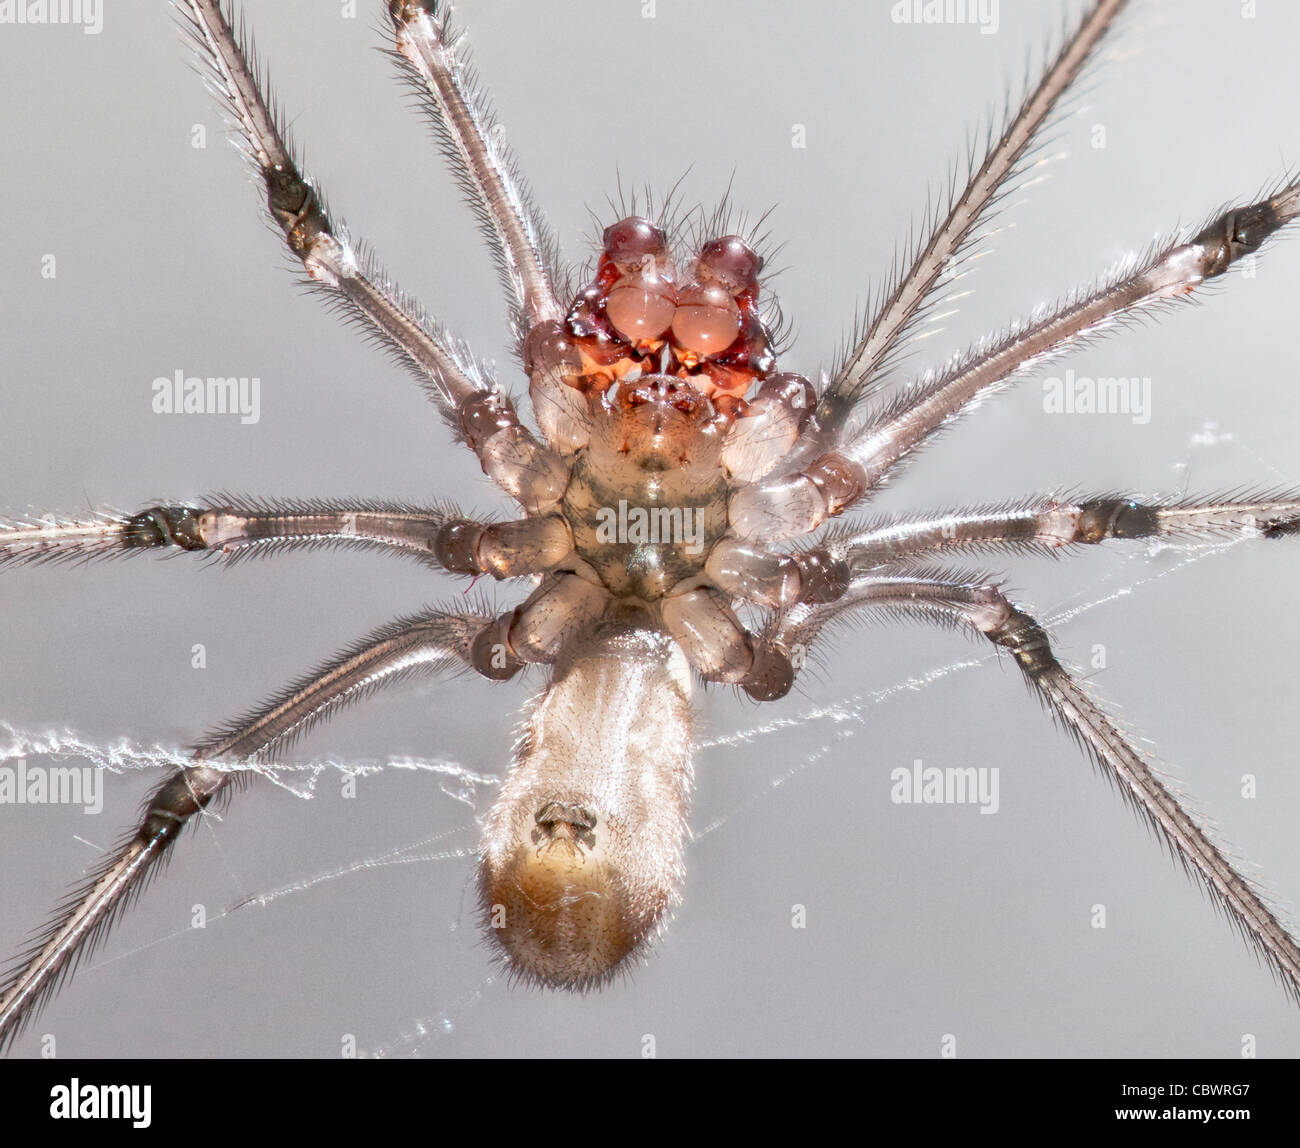 underside of long-bodied cellar spider Pholcus phalangioides close-up Stock Photo